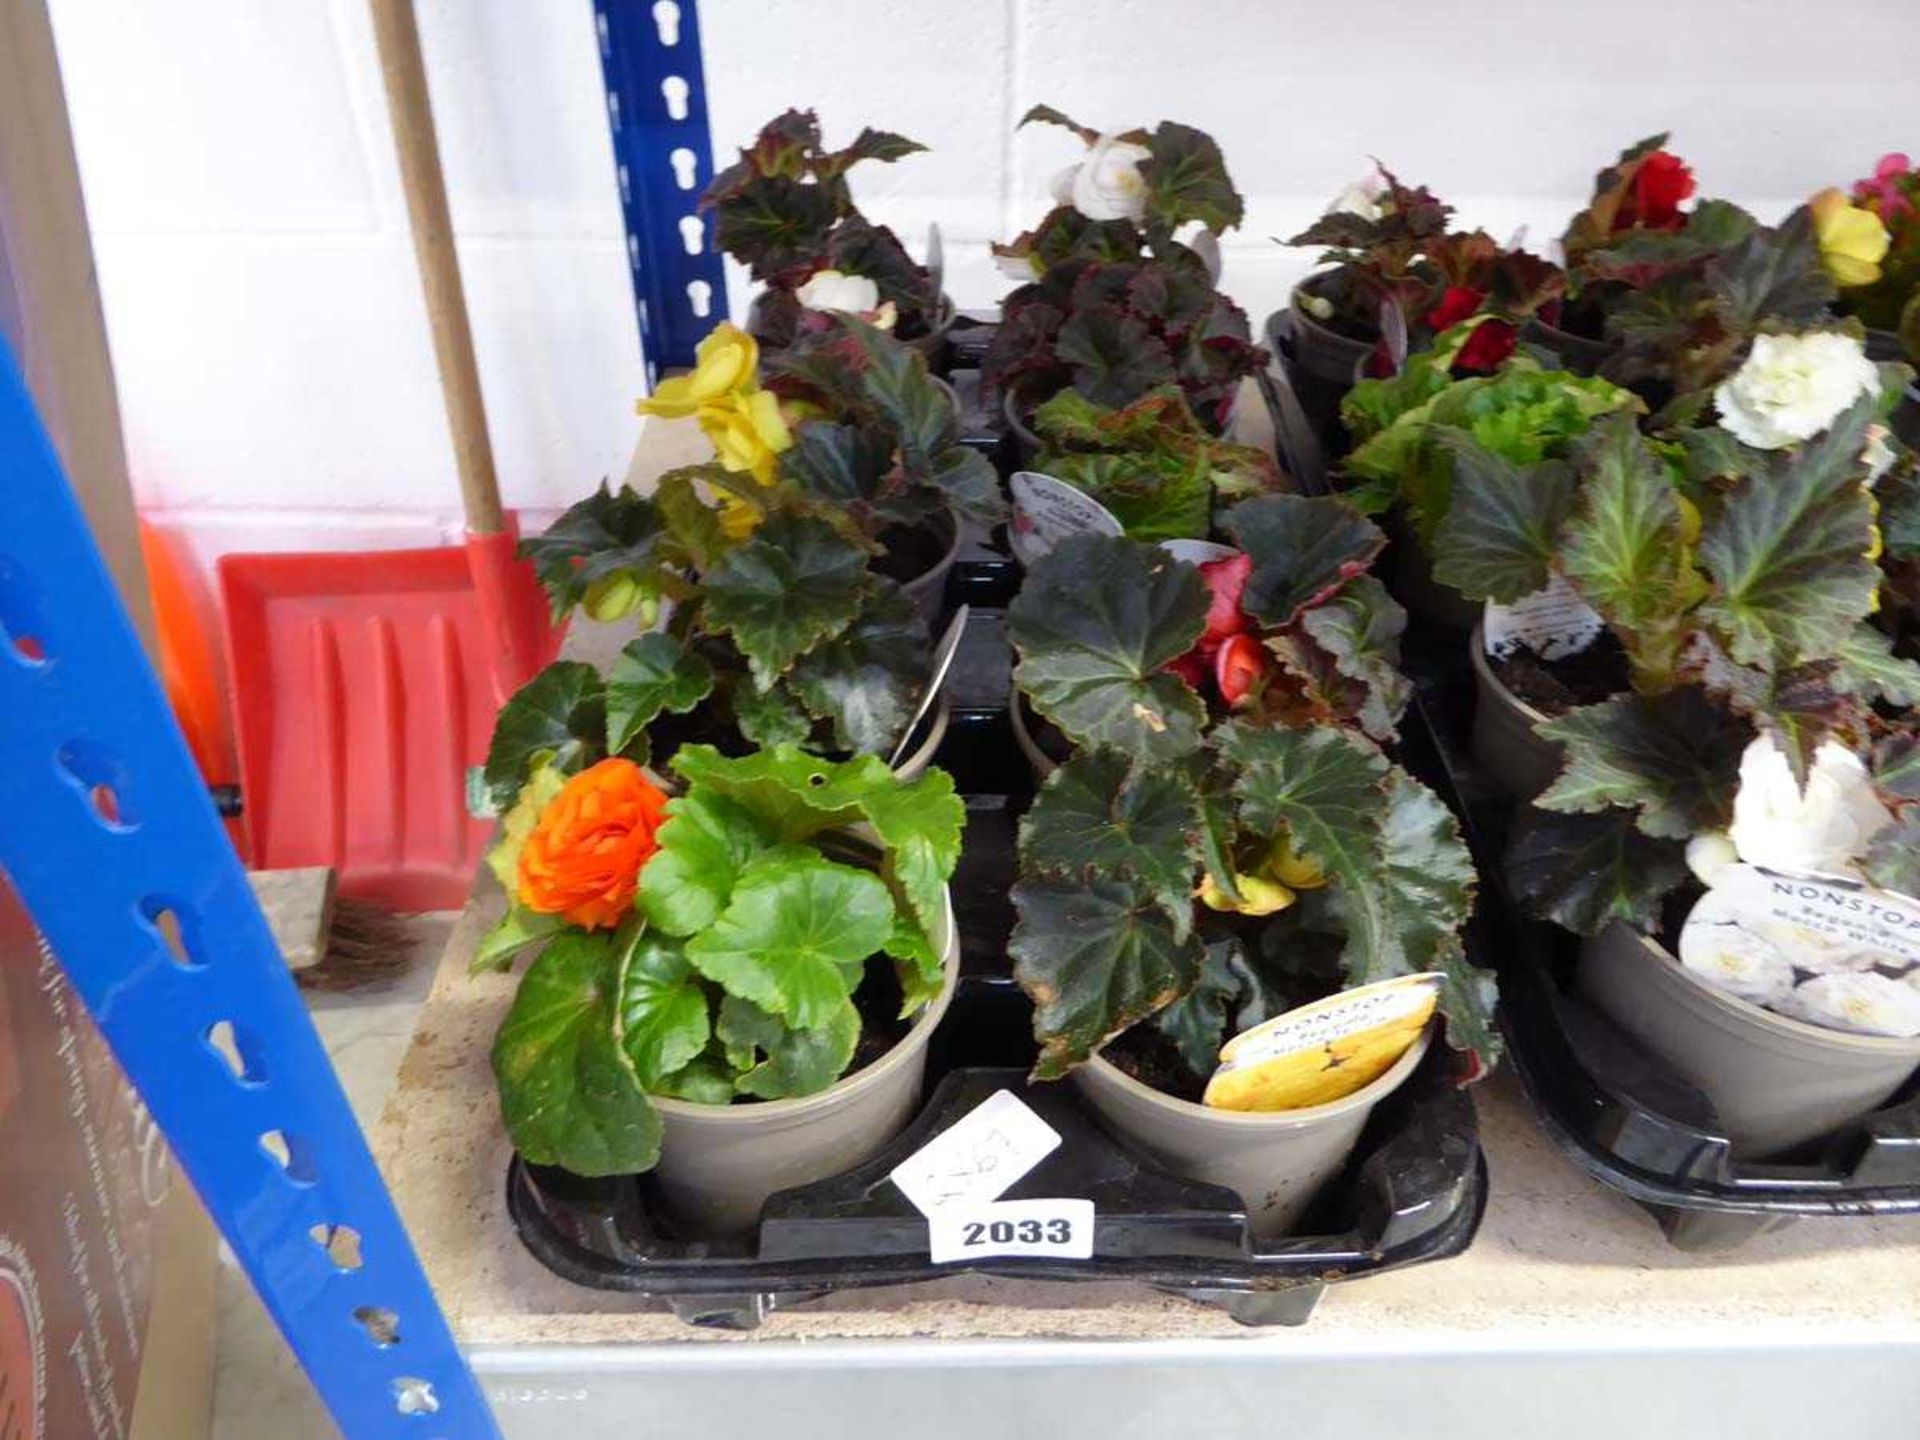 Tray containing 10 pots of begonias